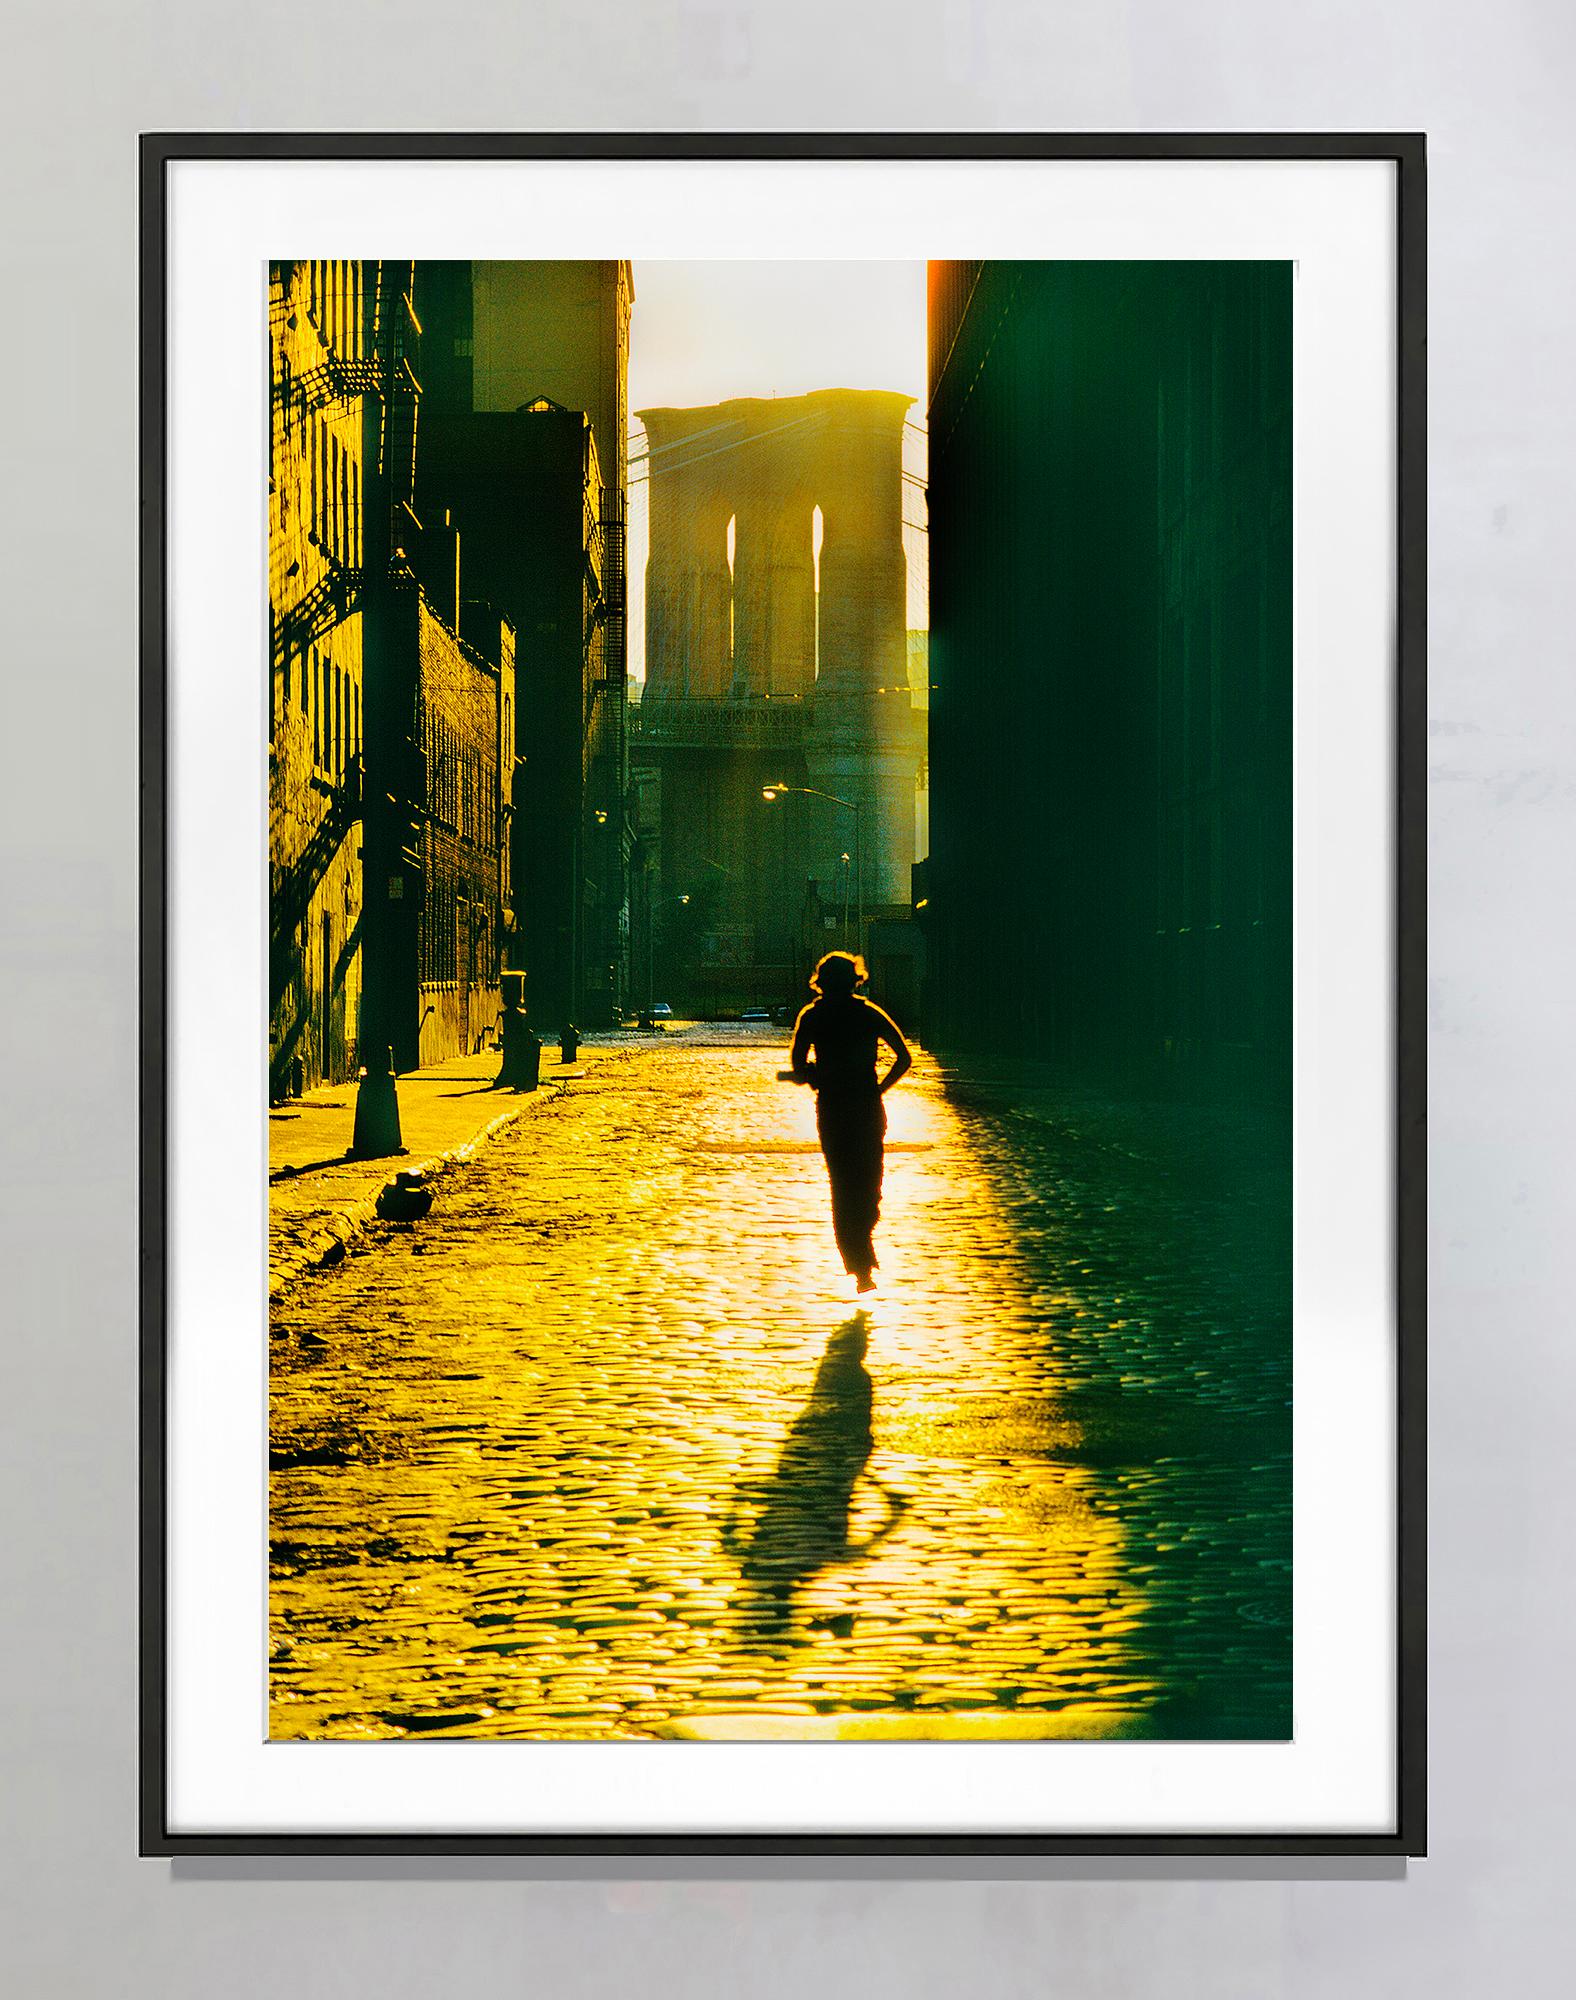 Floating Runner Glides Above Dumbo Cobblestone in Angelic Light - Photograph by Mitchell Funk